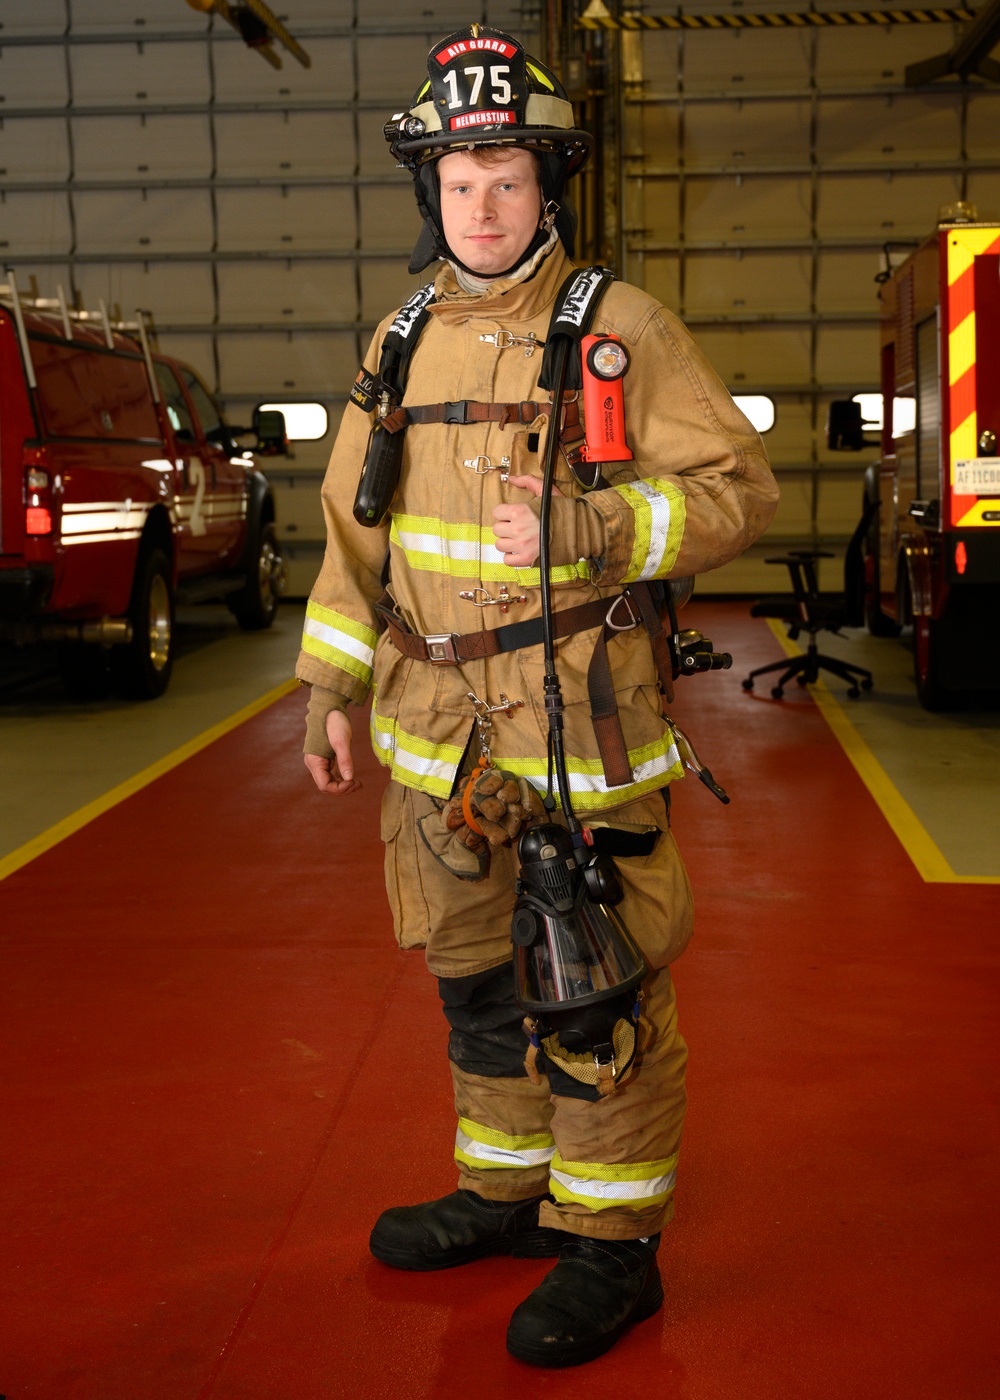 I Am the Mission - Firefighter